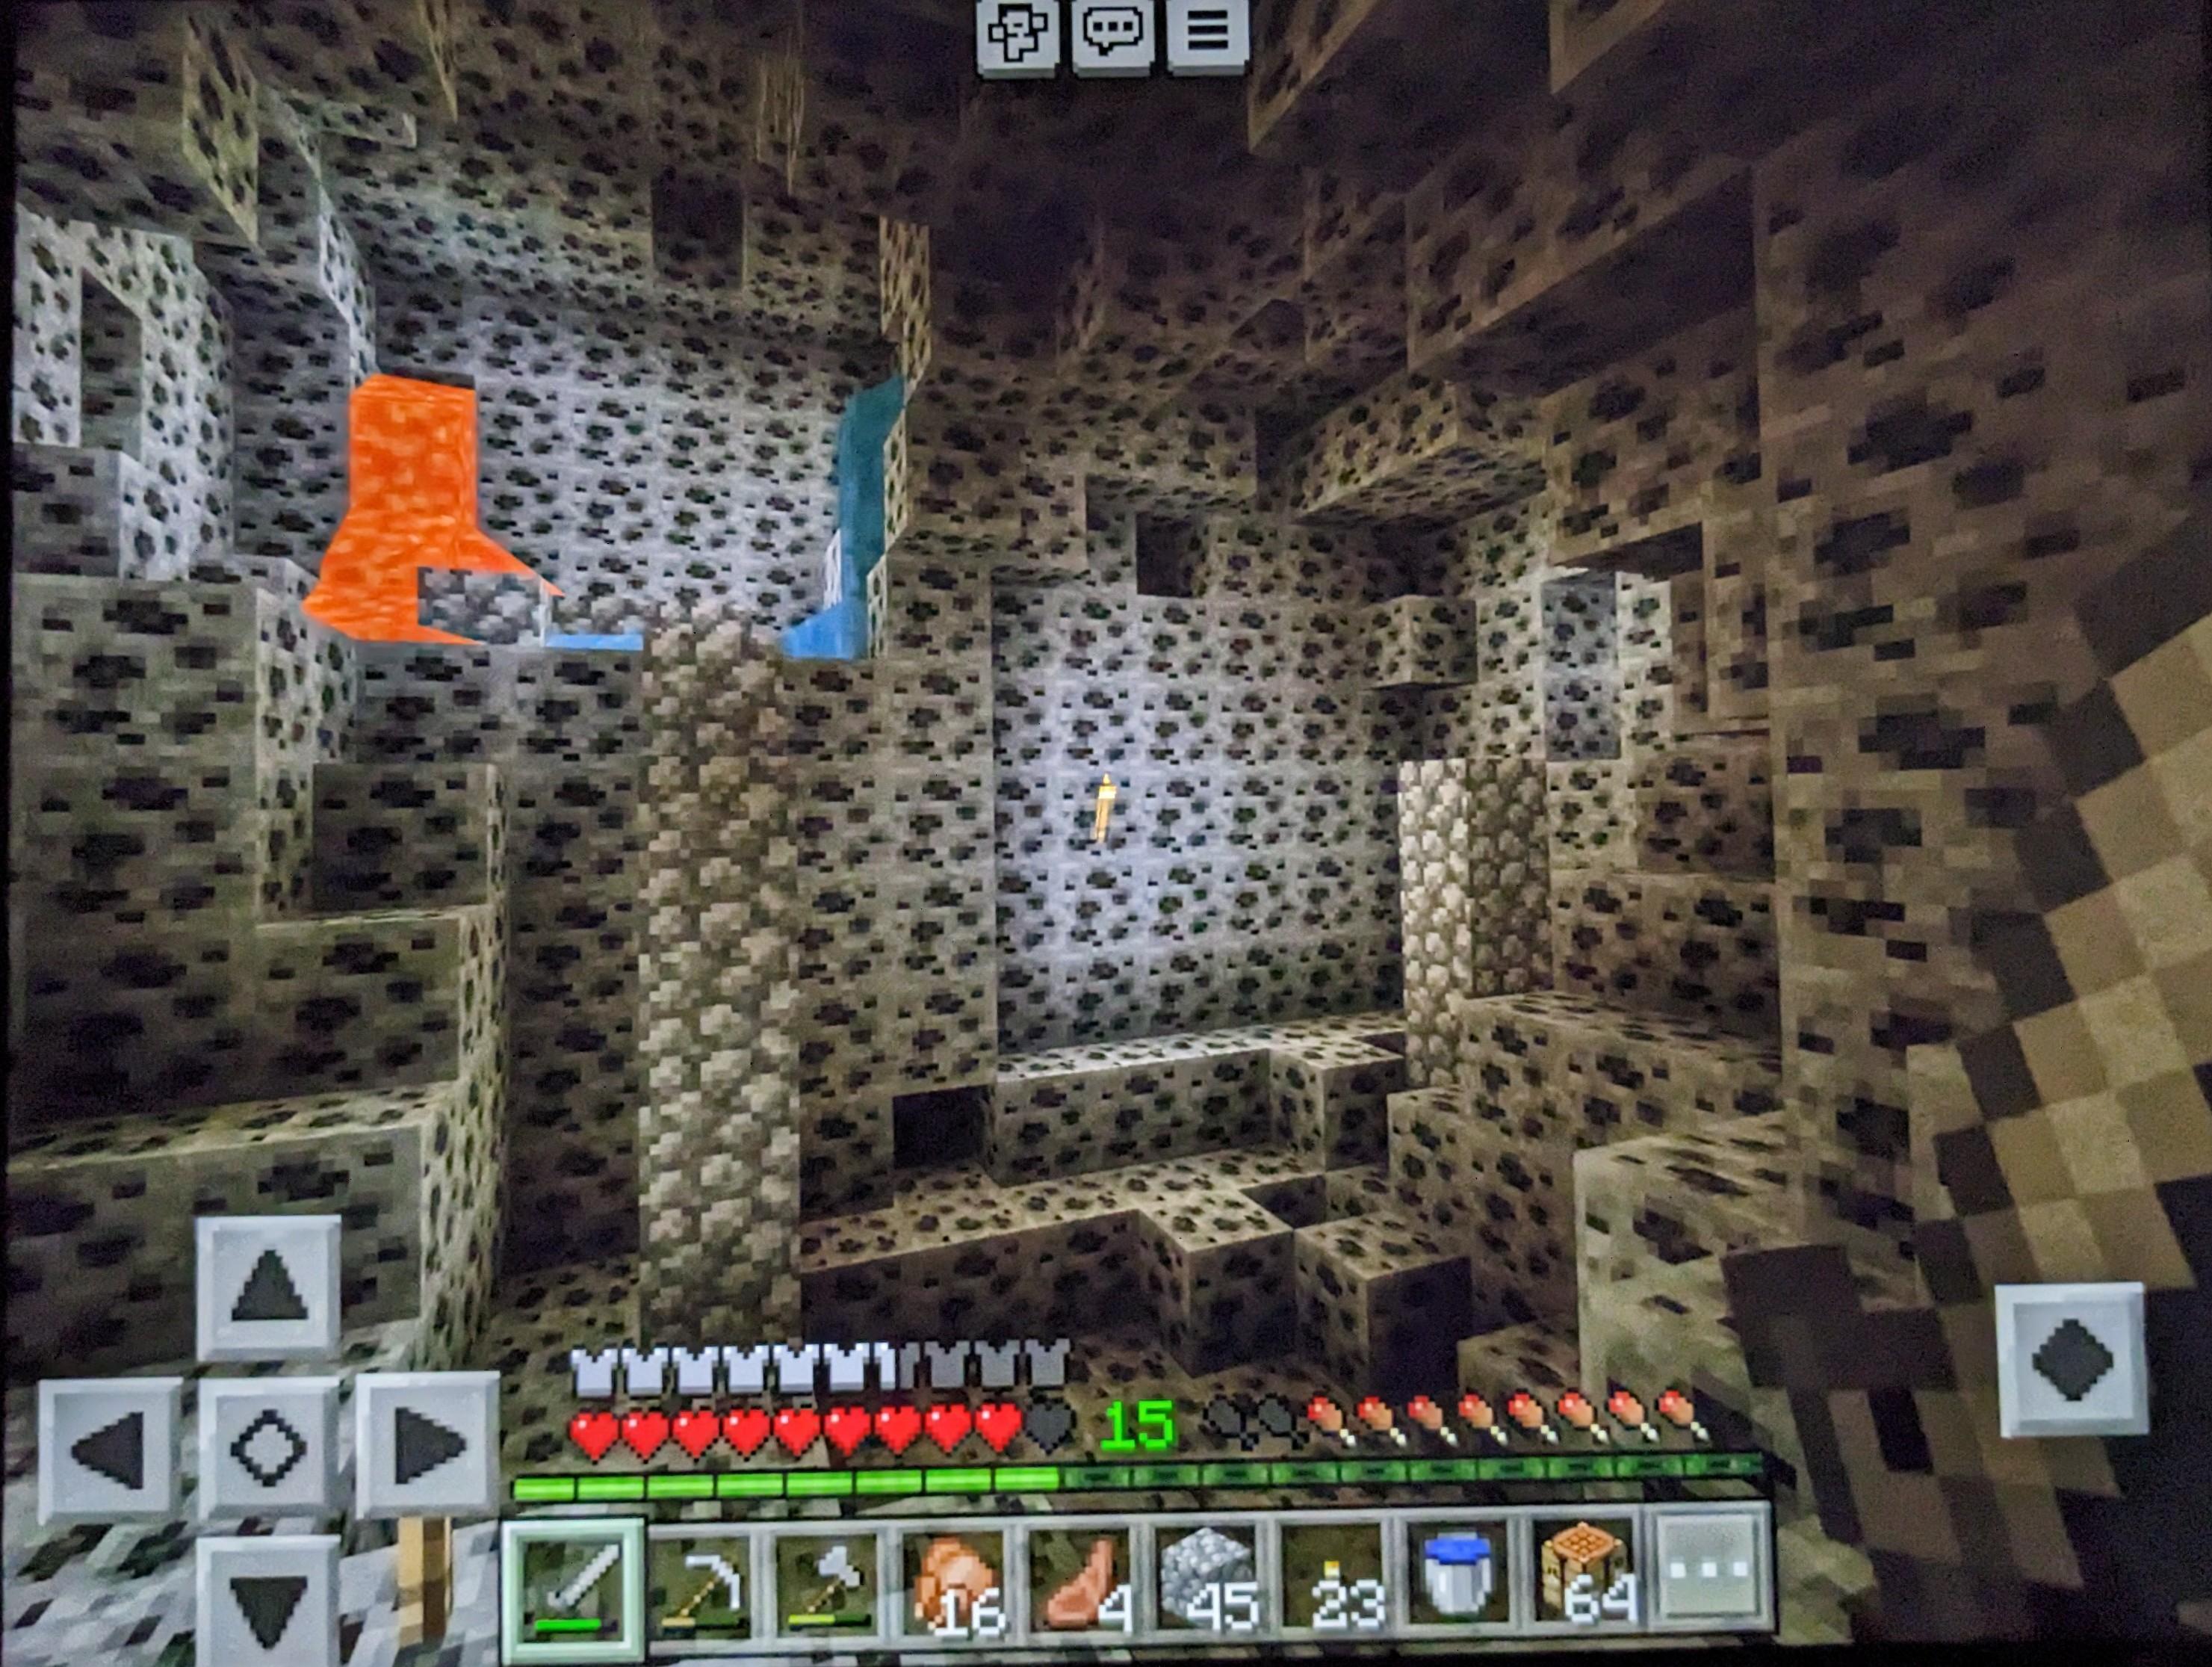 Minecraft Memes - Coal mining in Minecraft be like: Still not done after an hour!